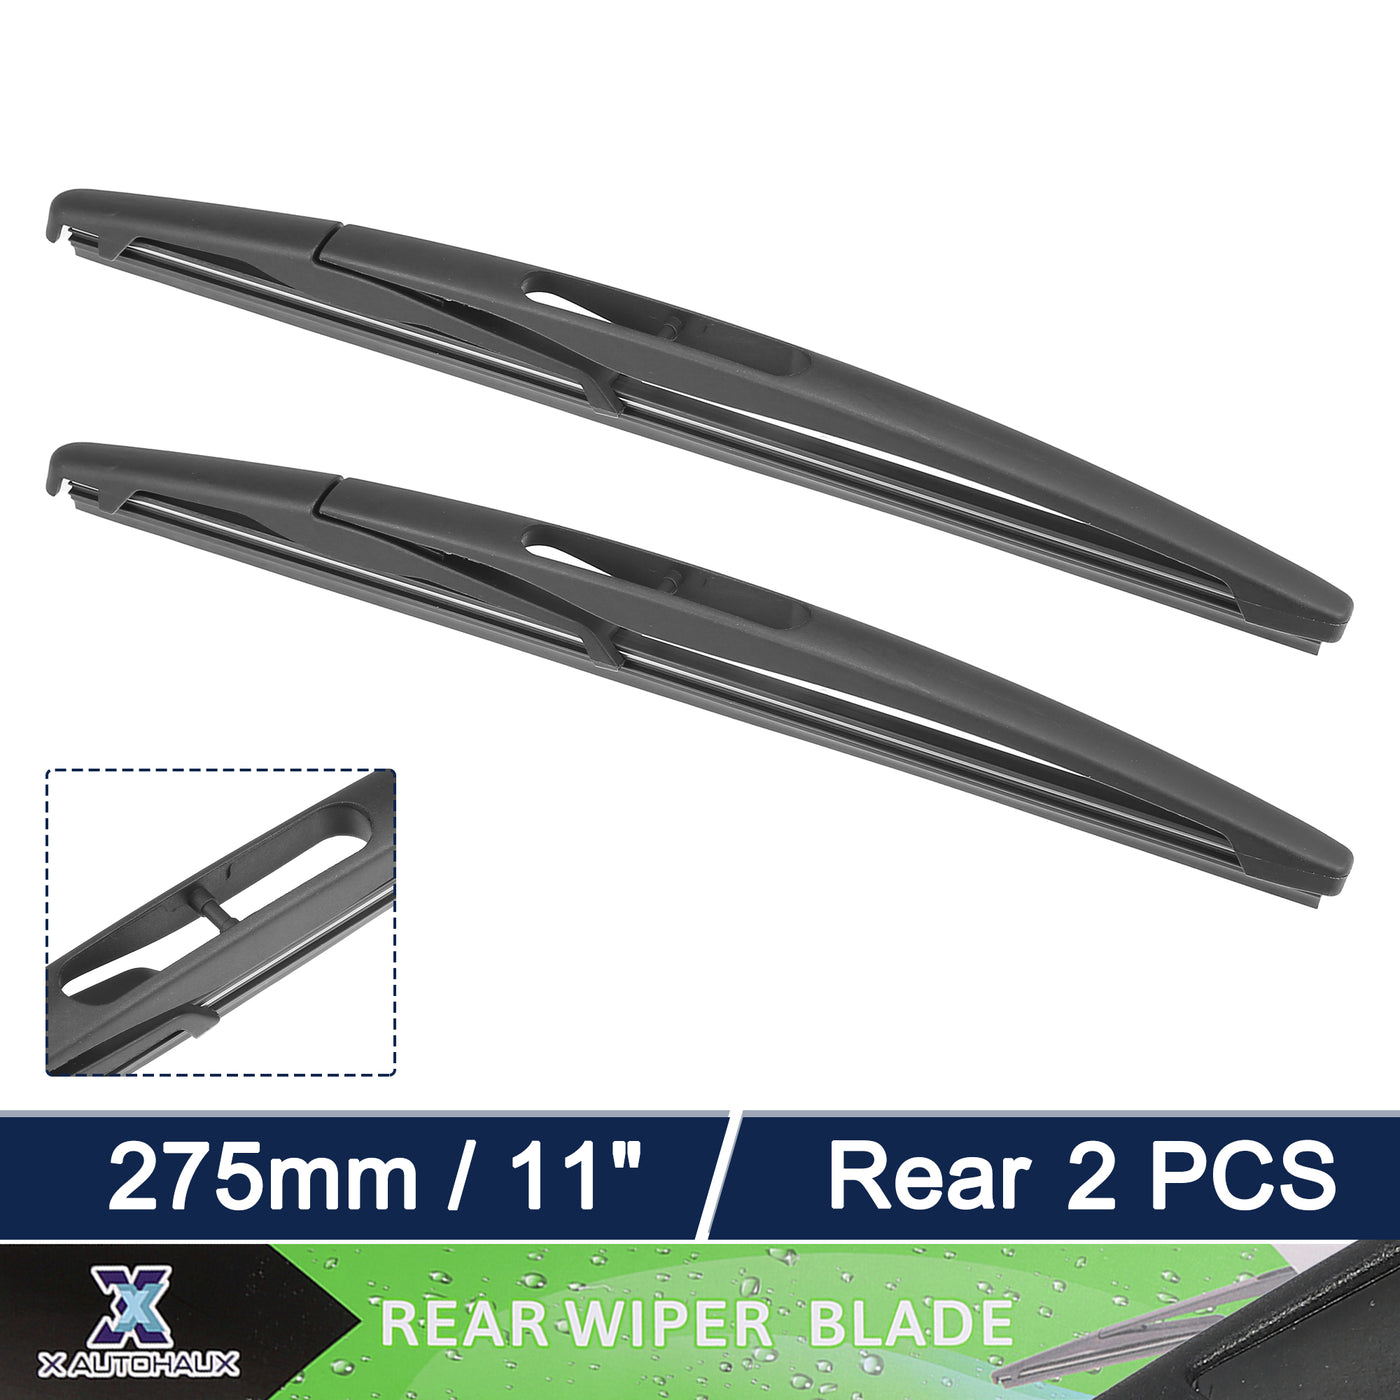 X AUTOHAUX 2pcs Rear Windshield Wiper Blade Replacement for GMC Acadia 2007-2012 for Chevrolet Aveo 2011-2016 for Chrysler 300 Touring 2005-2008